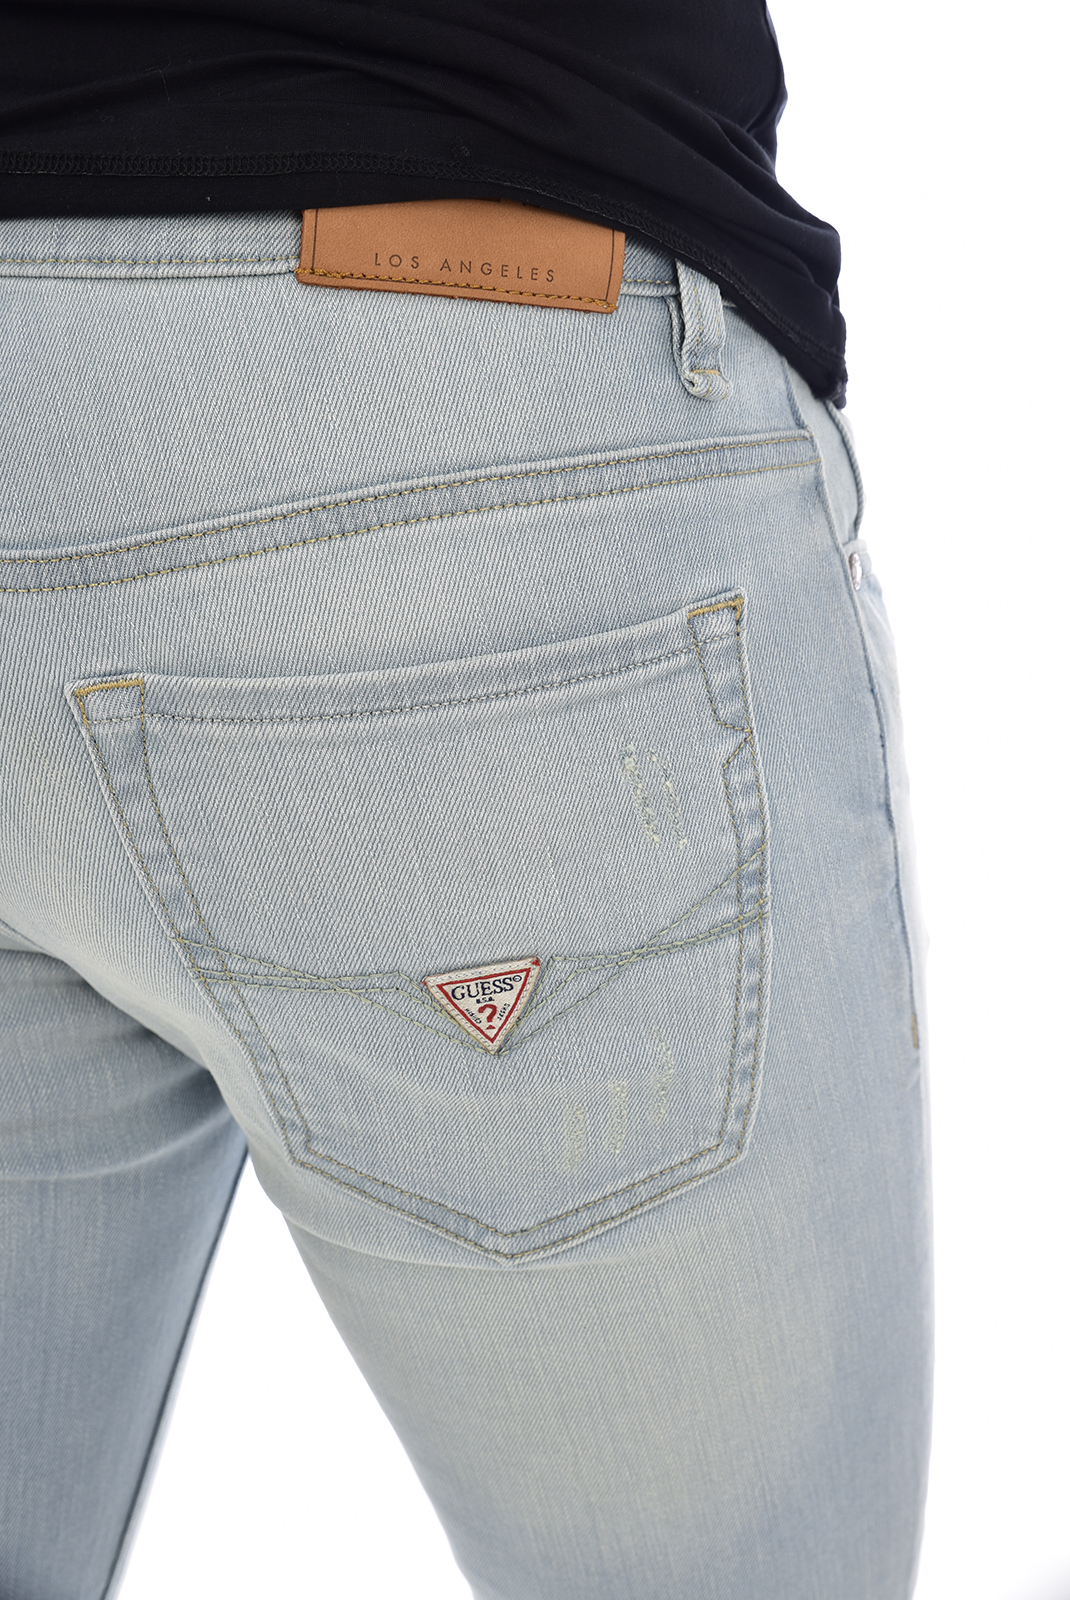 Jeans bleu skinny taille basse homme - Guess M92an2